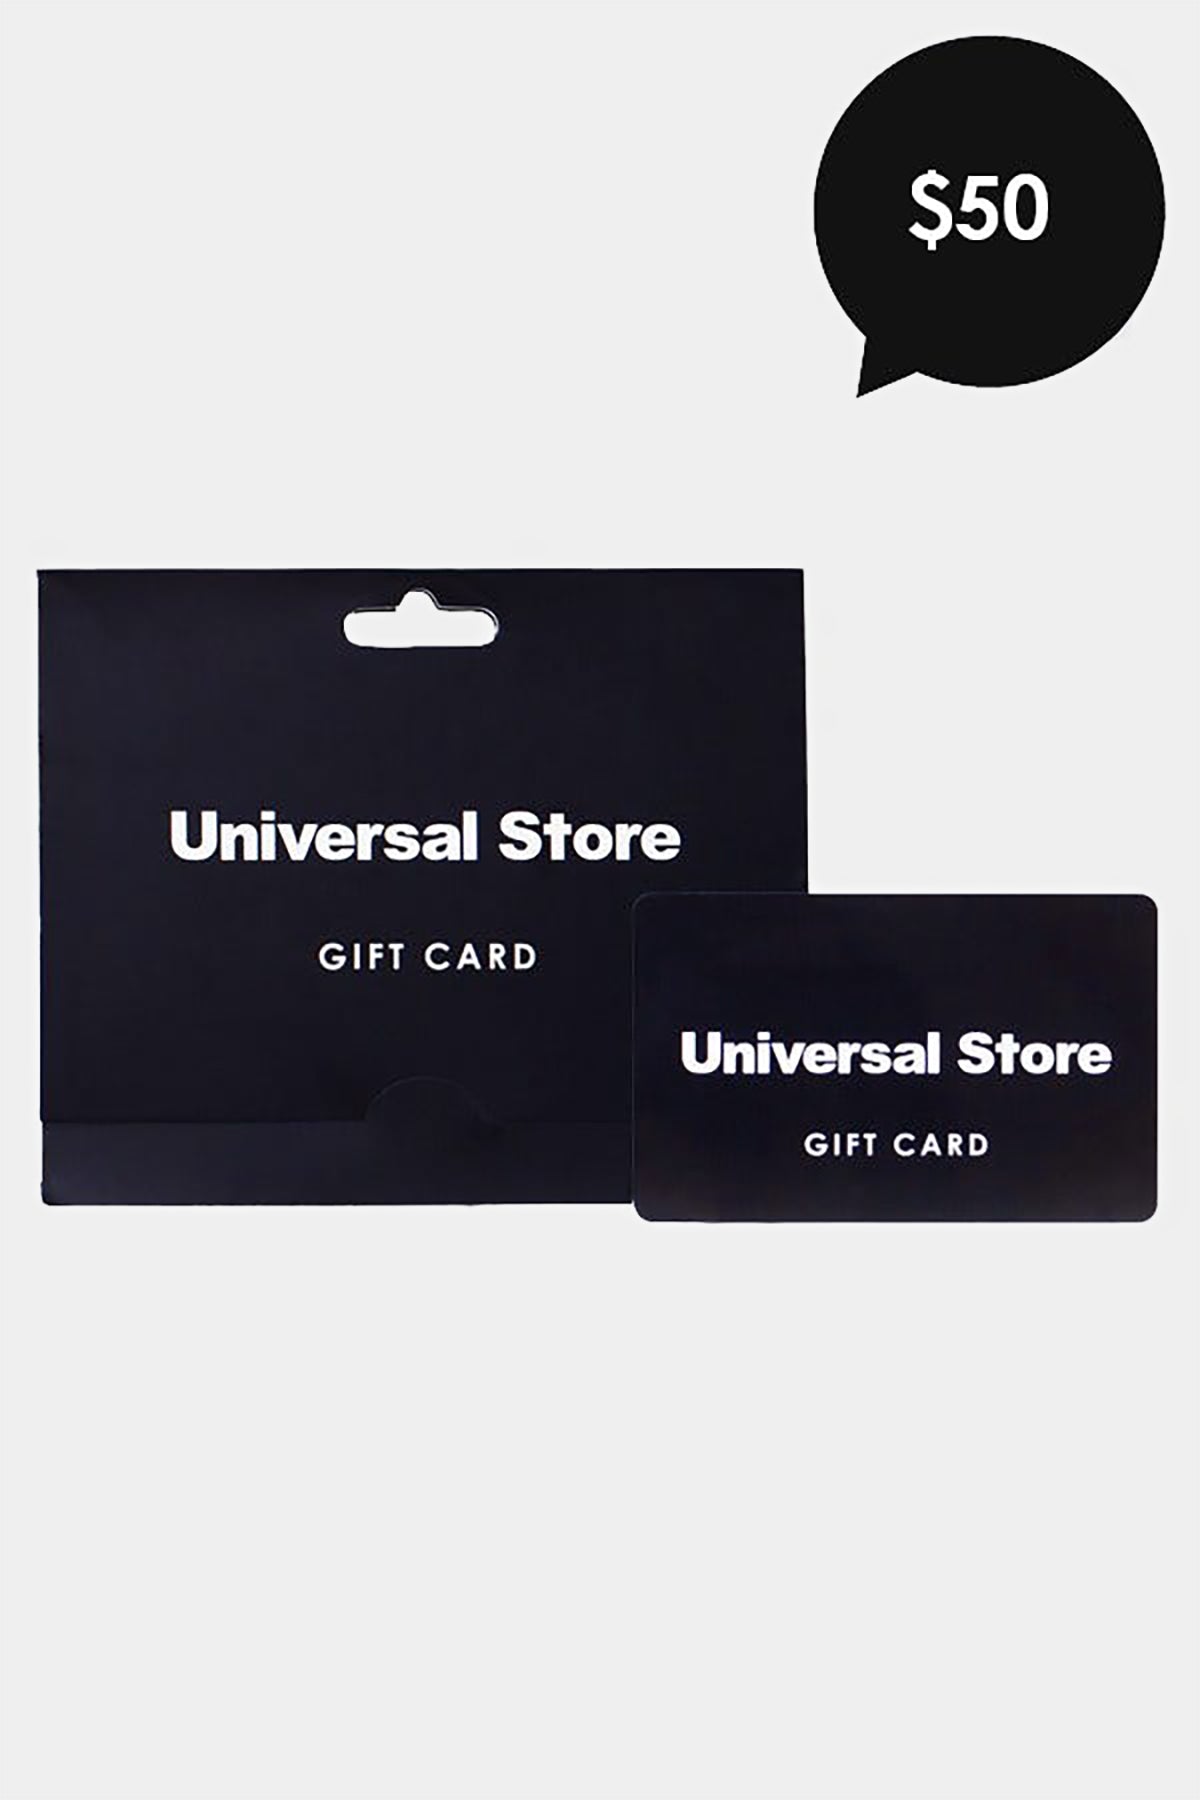 Universal Store $50 Gift Card